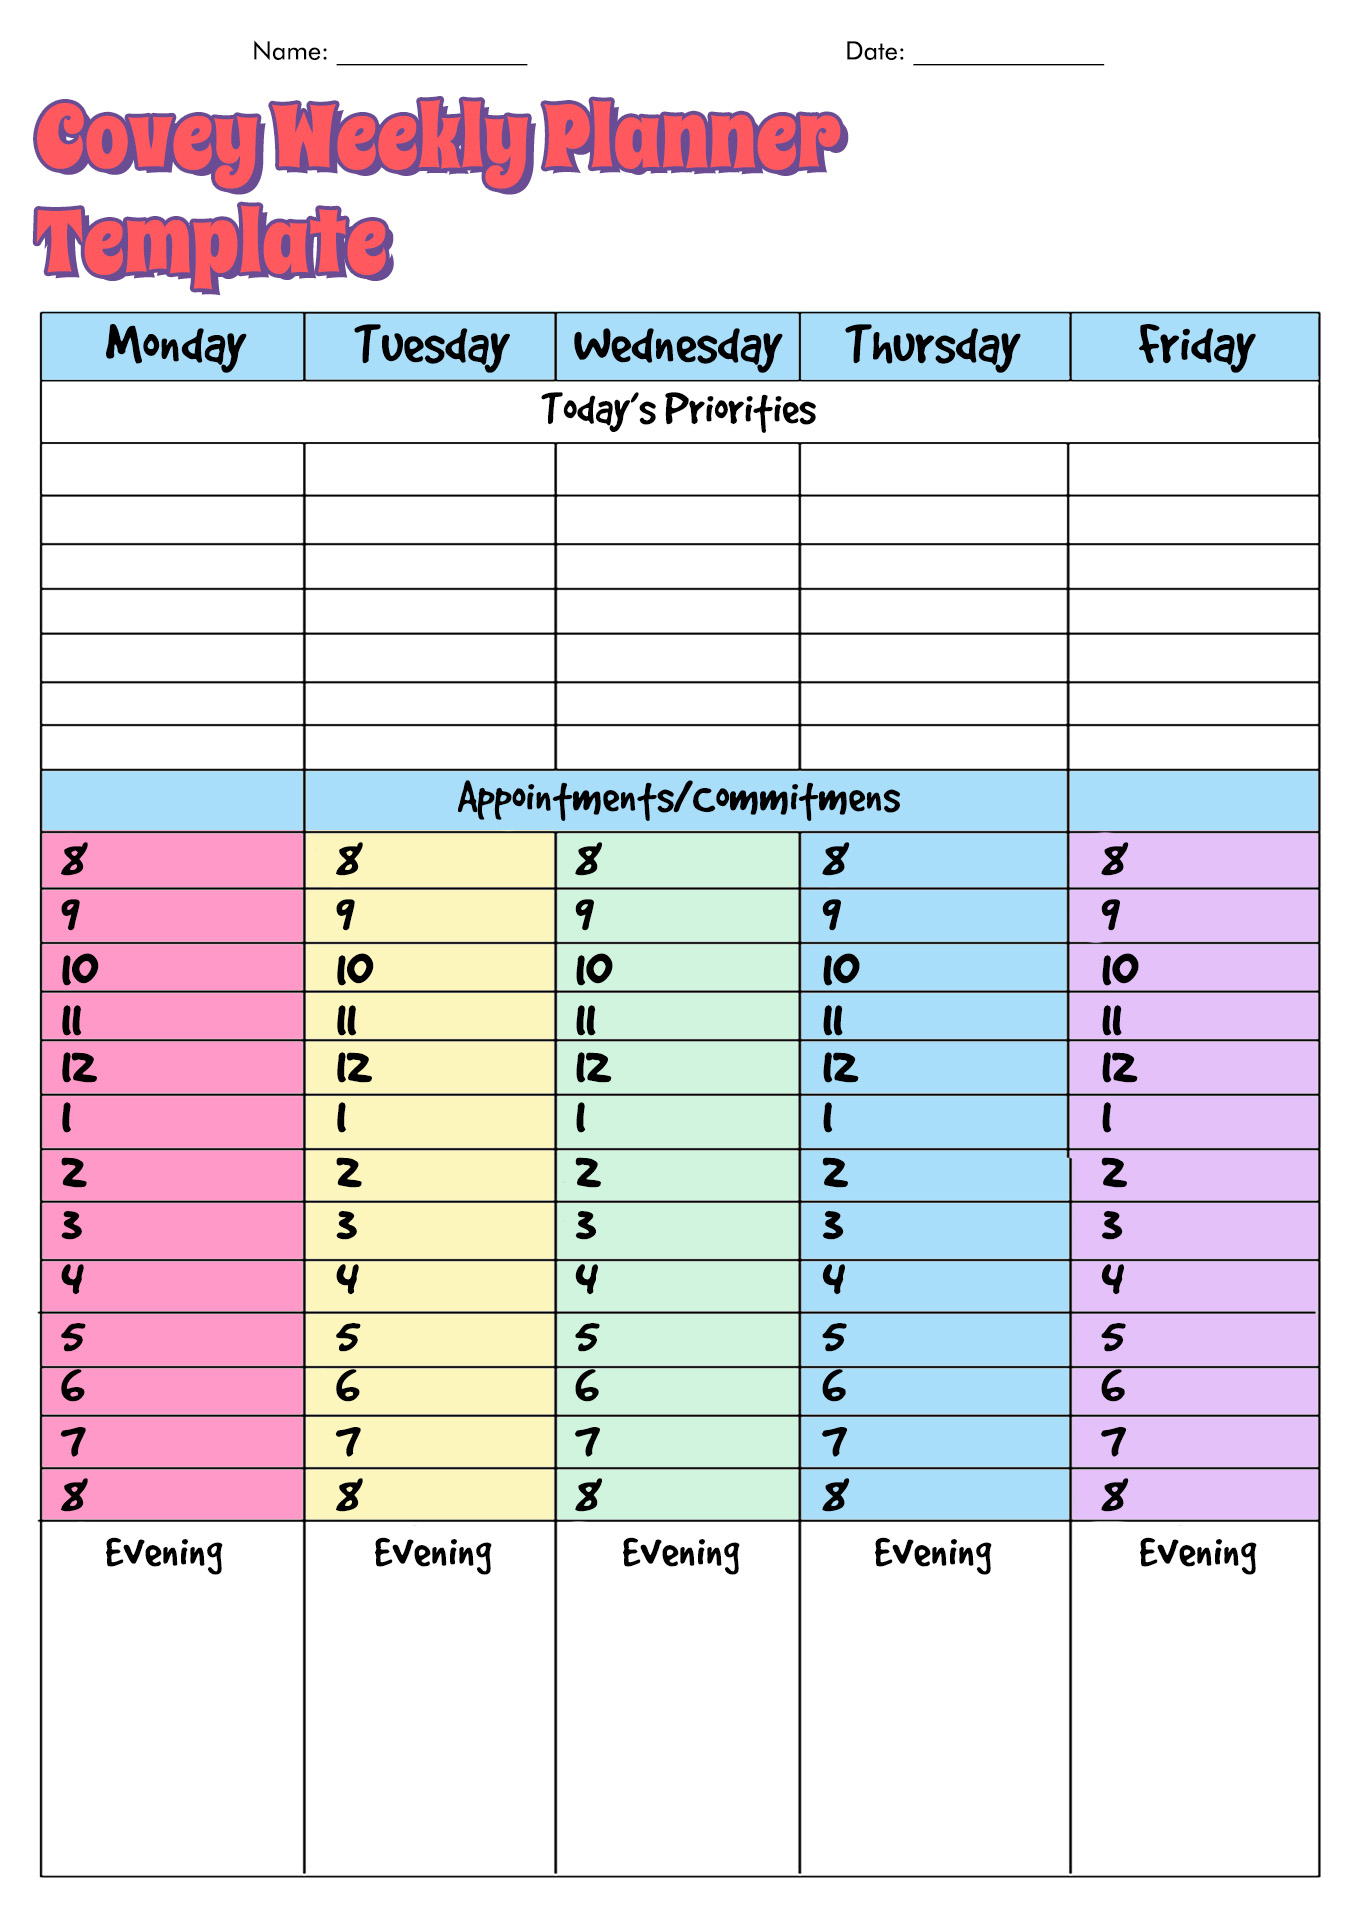 Covey Weekly Planner Template Image